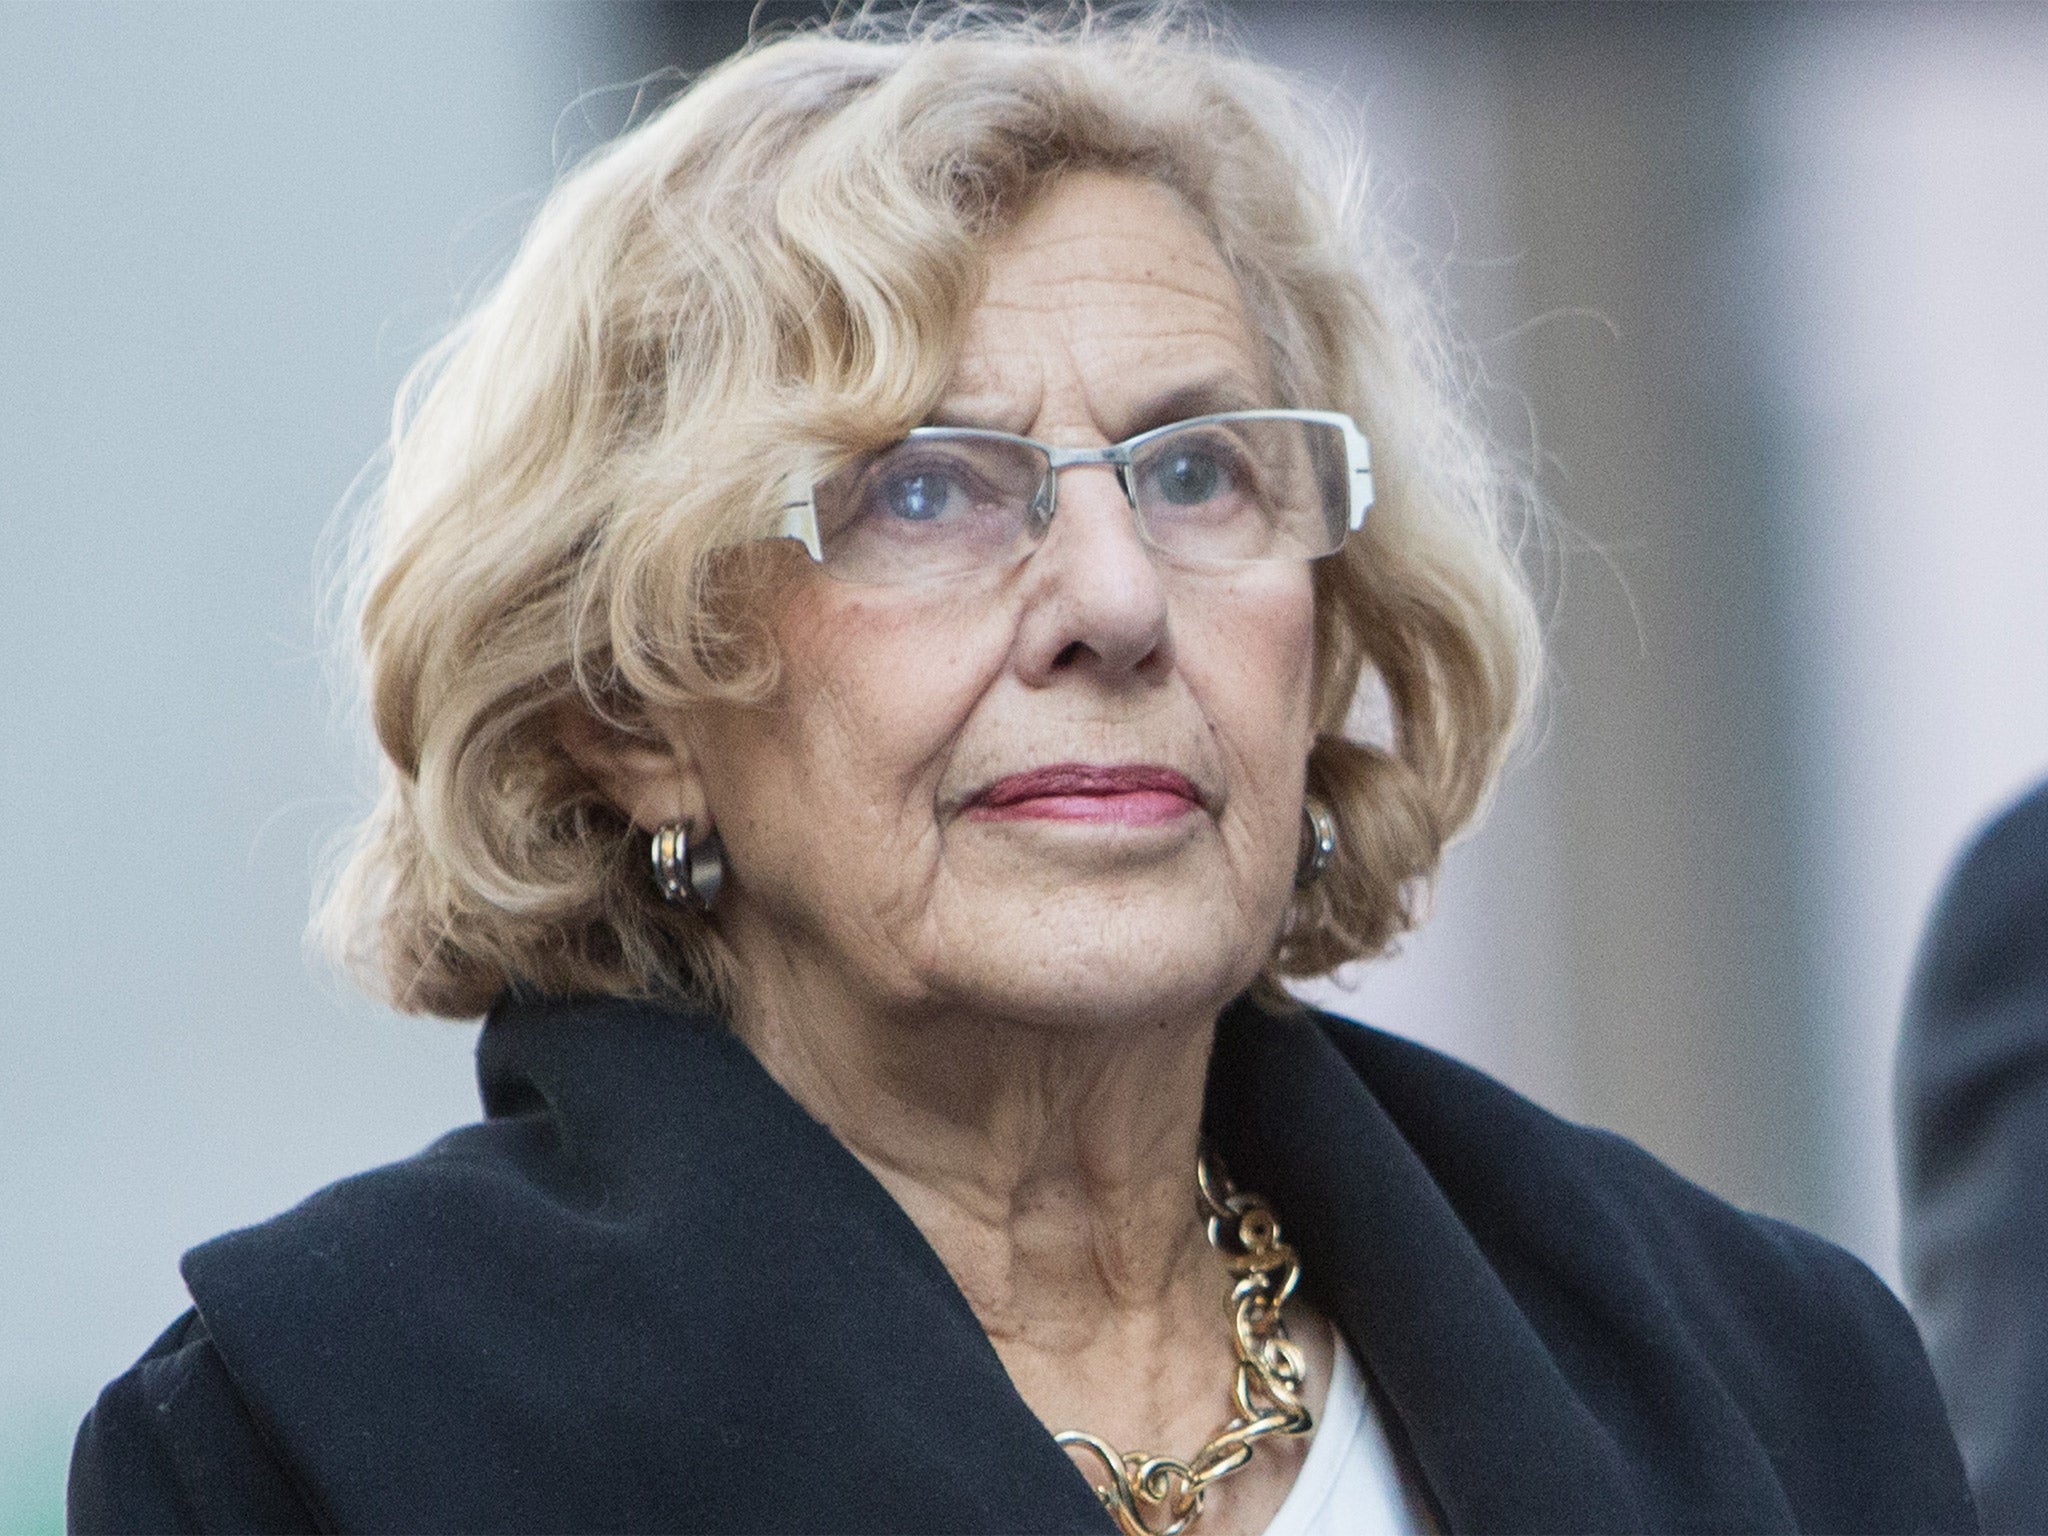 Manuela Carmena, a former judge, has won friends and enemies with her open opinions about being Mayor of Madrid